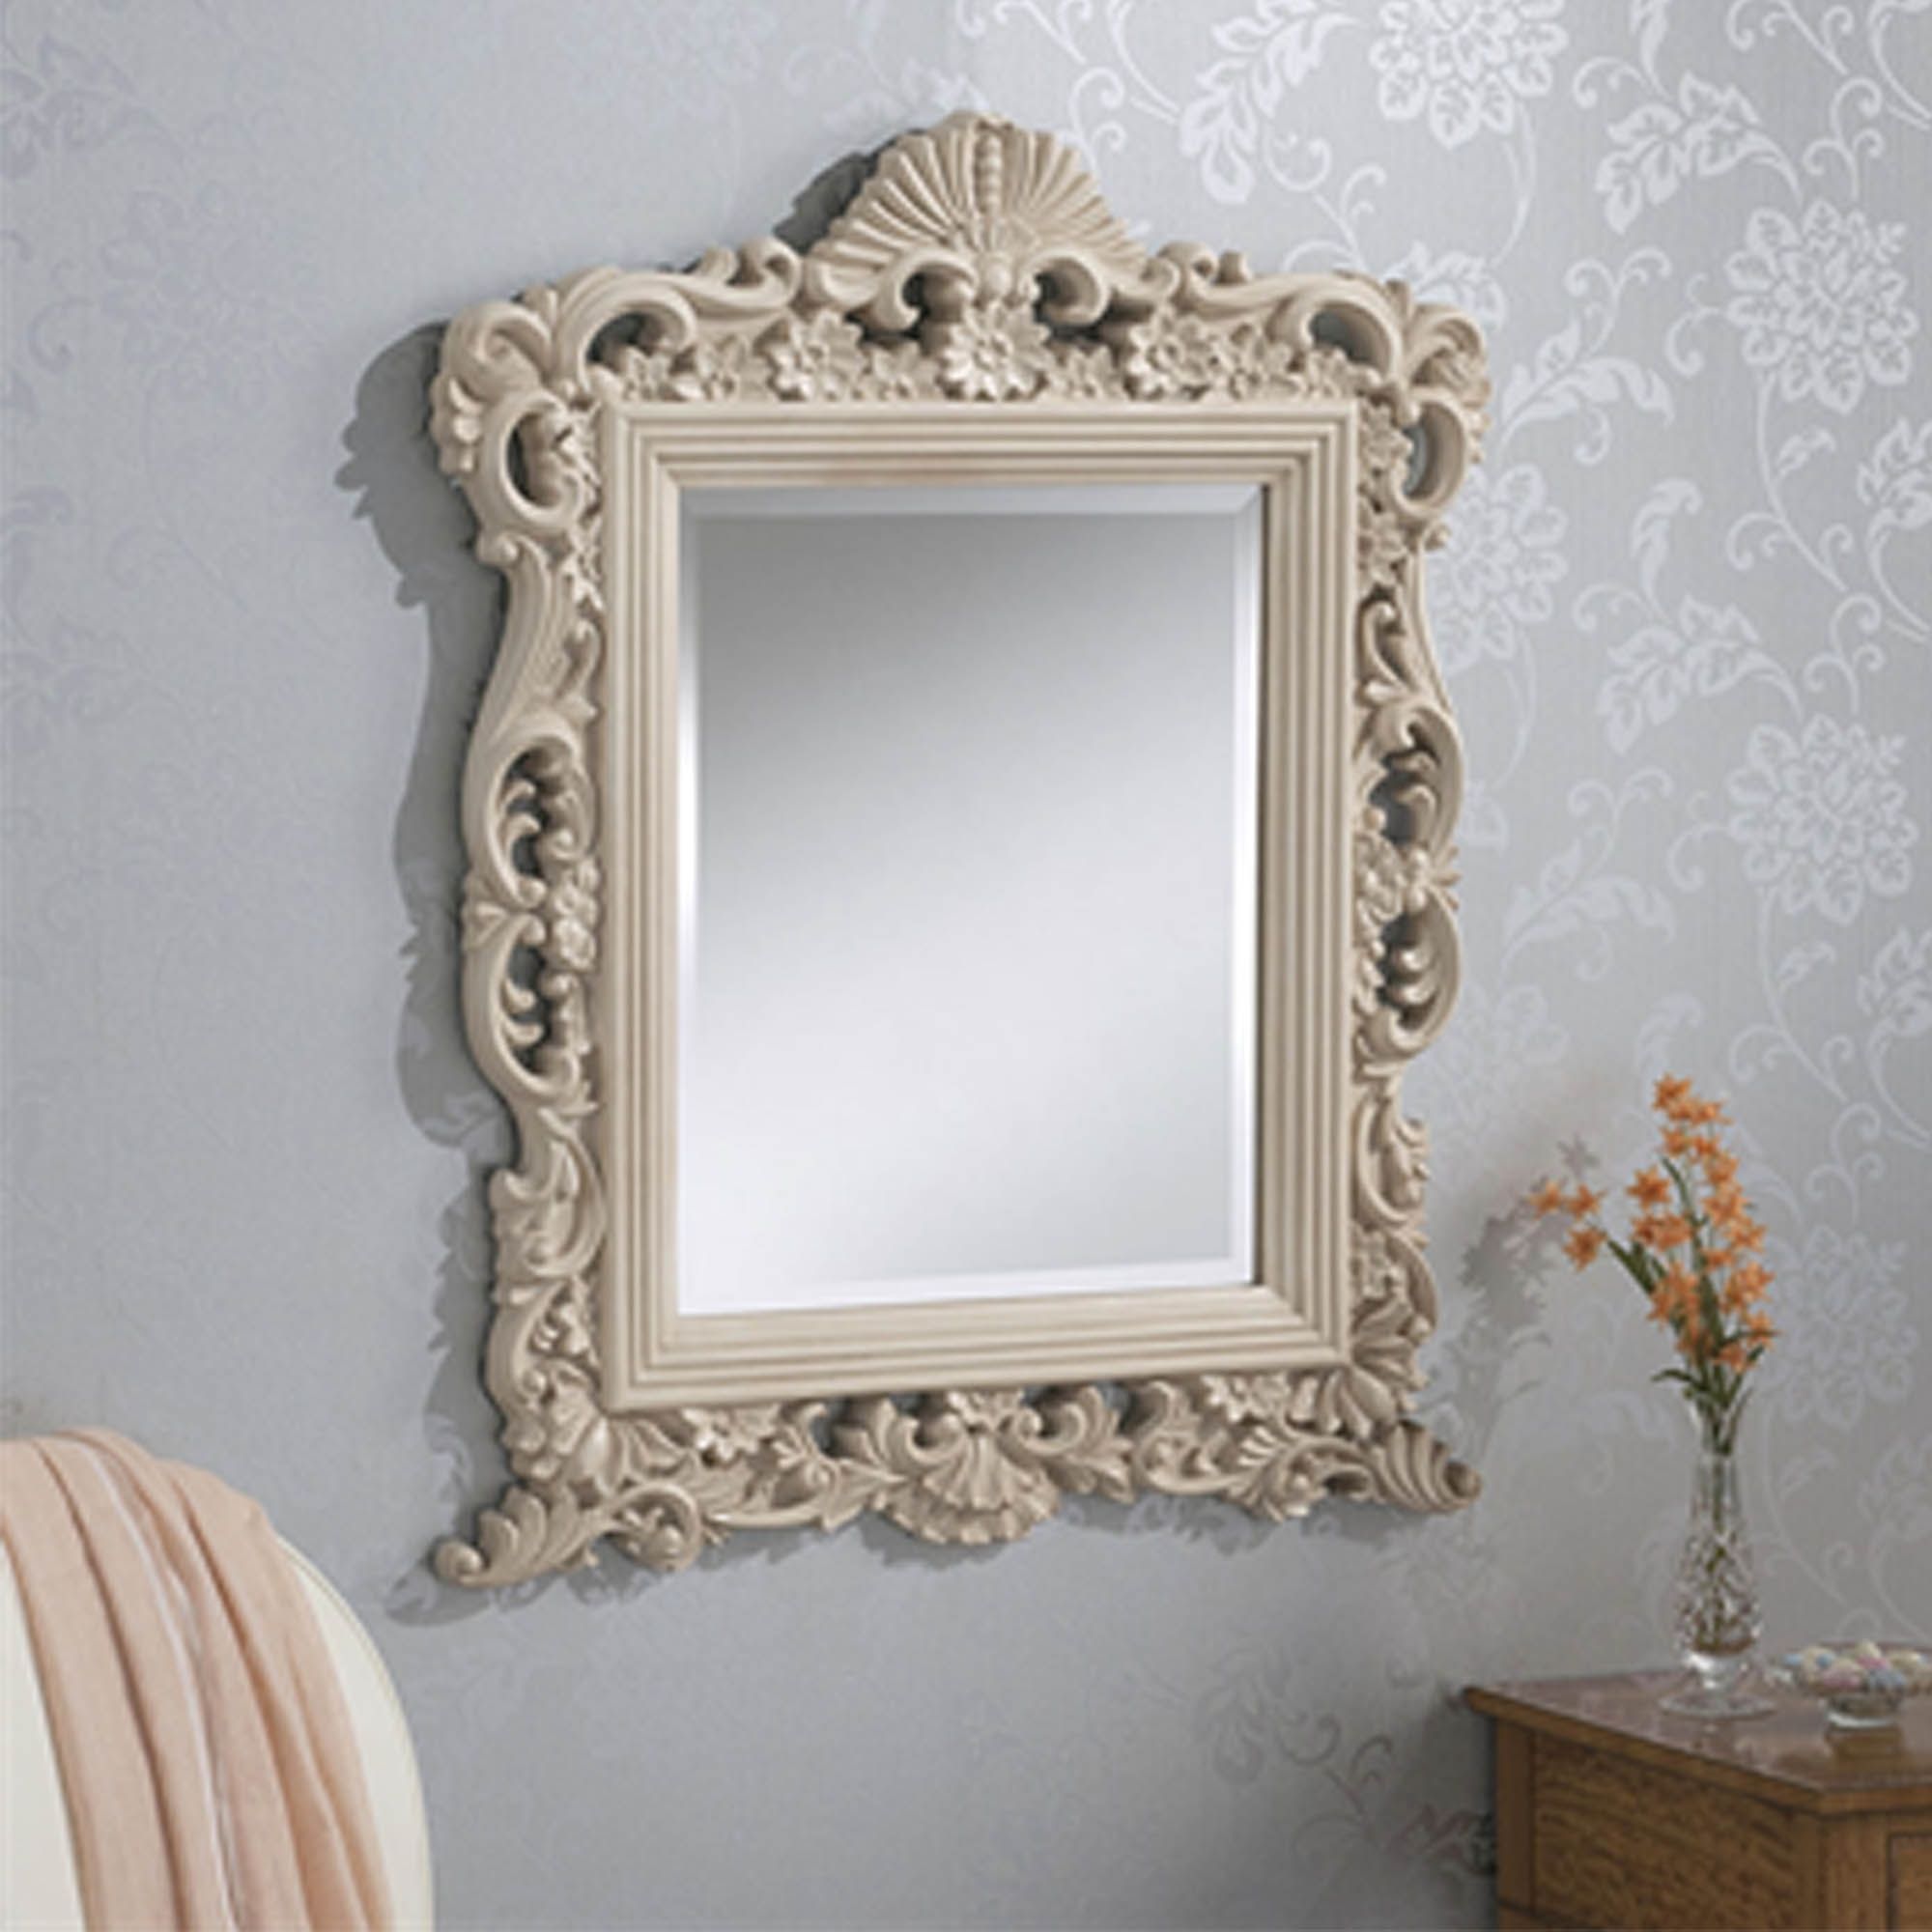 Decorative Antique French Style Ivory Ornate Wall Mirror | Hd365 With Booth Reclaimed Wall Mirrors Accent (View 5 of 15)